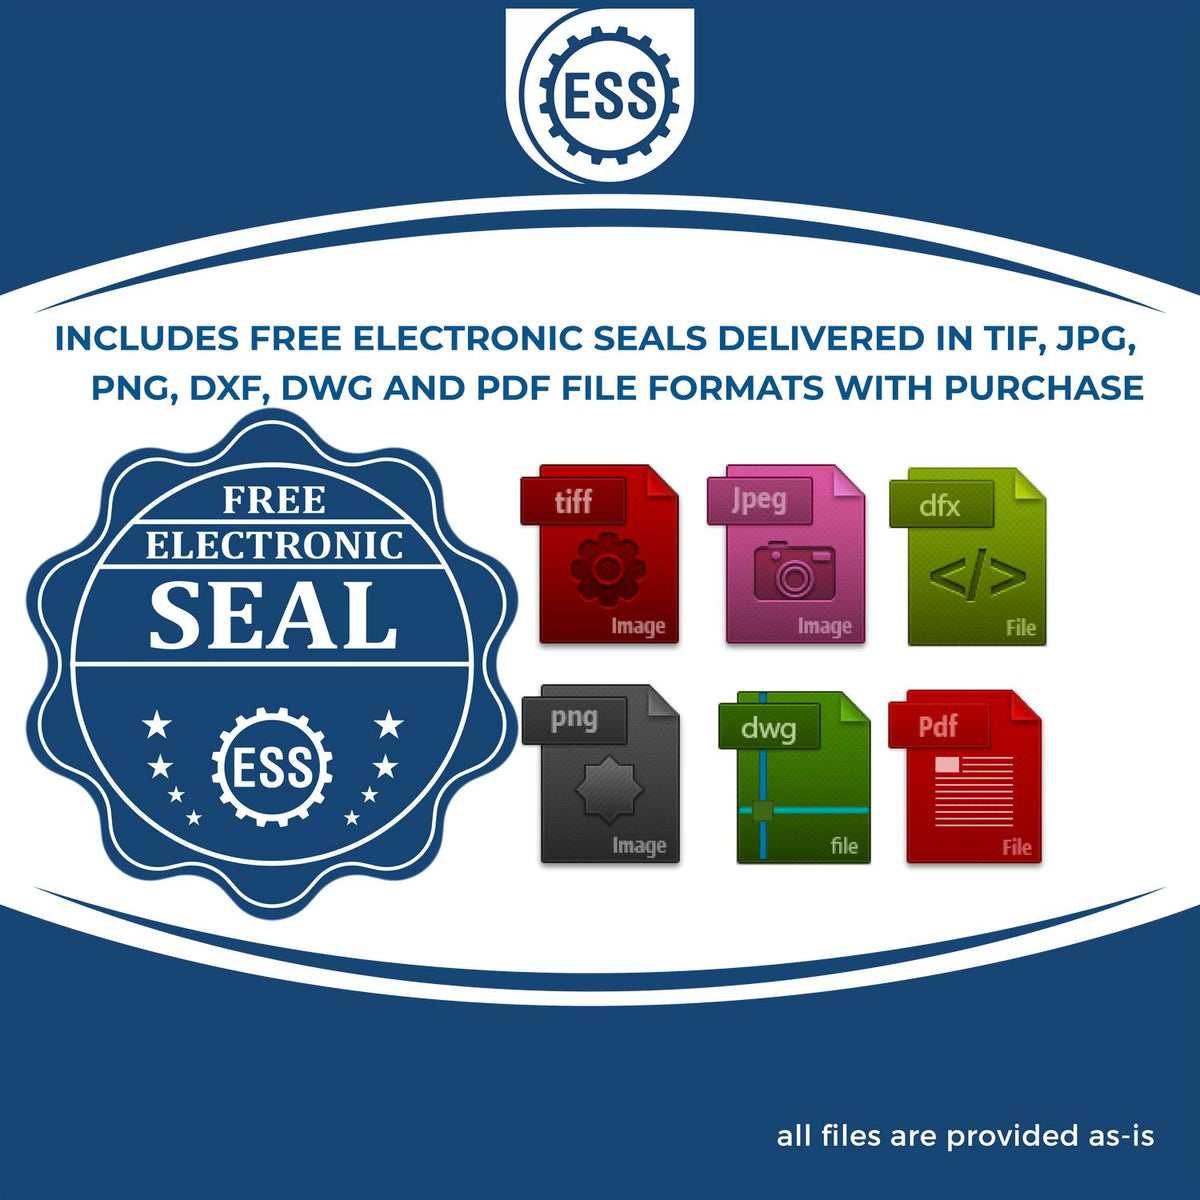 An infographic for the free electronic seal for the Heavy Duty Cast Iron North Carolina Geologist Seal Embosser illustrating the different file type icons such as DXF, DWG, TIF, JPG and PNG.